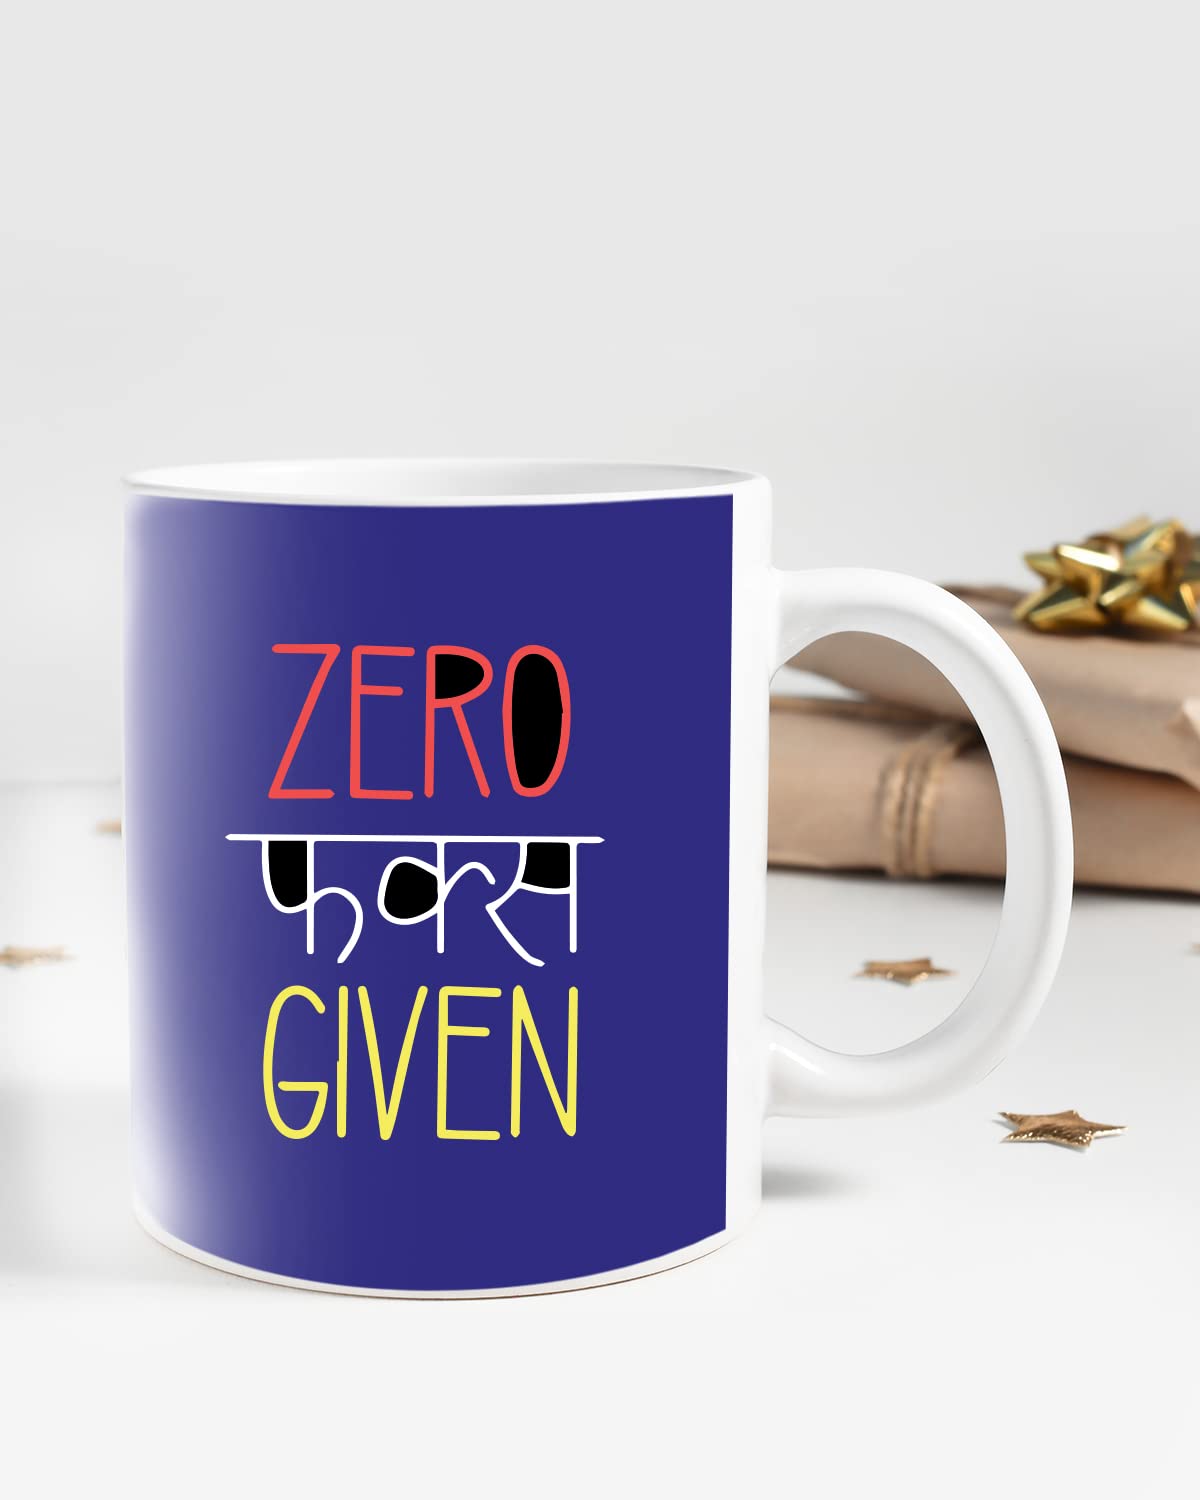 Zero F***S Given Coffee Mug - Gift for Friend, Birthday Gift, Birthday Mug, Motivational Quotes Mug, Mugs with Funny & Funky Dialogues, Bollywood Mugs, Funny Mugs for Him & Her